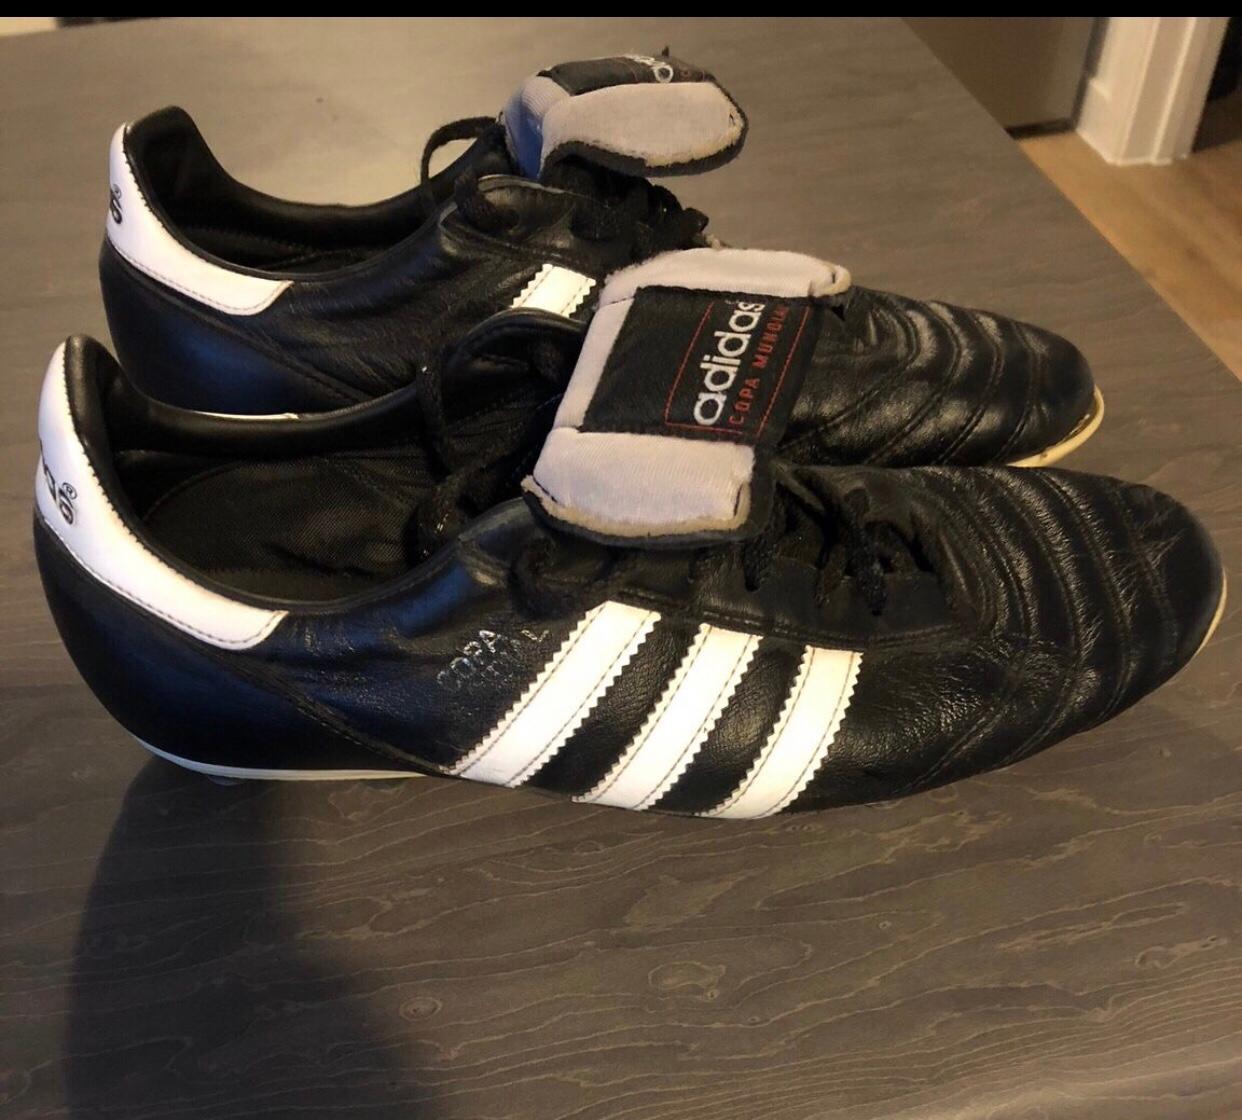 Adidas Copa Mundial 8.5uk in East Tilbury for £35.00 for sale | Shpock